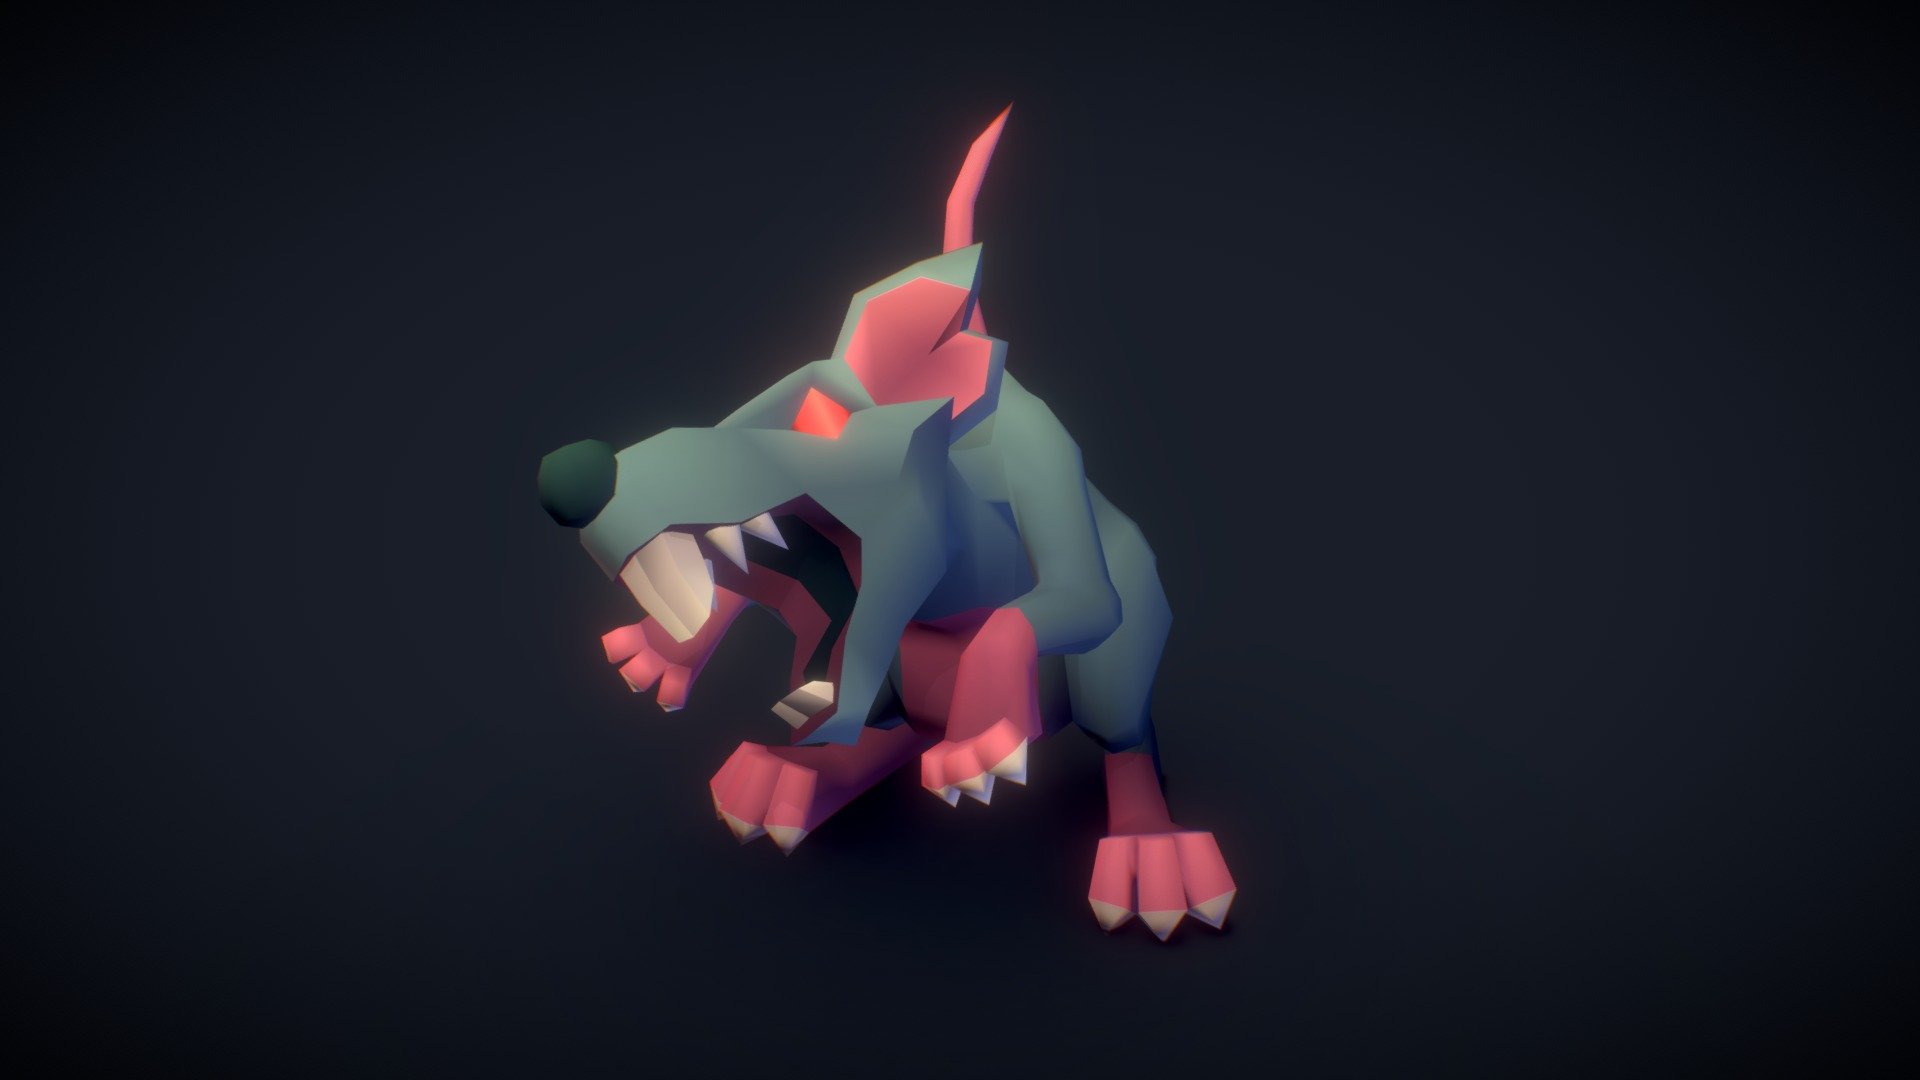 A posed, cartoony rat enemy character for a digital dungeon board game 3d model